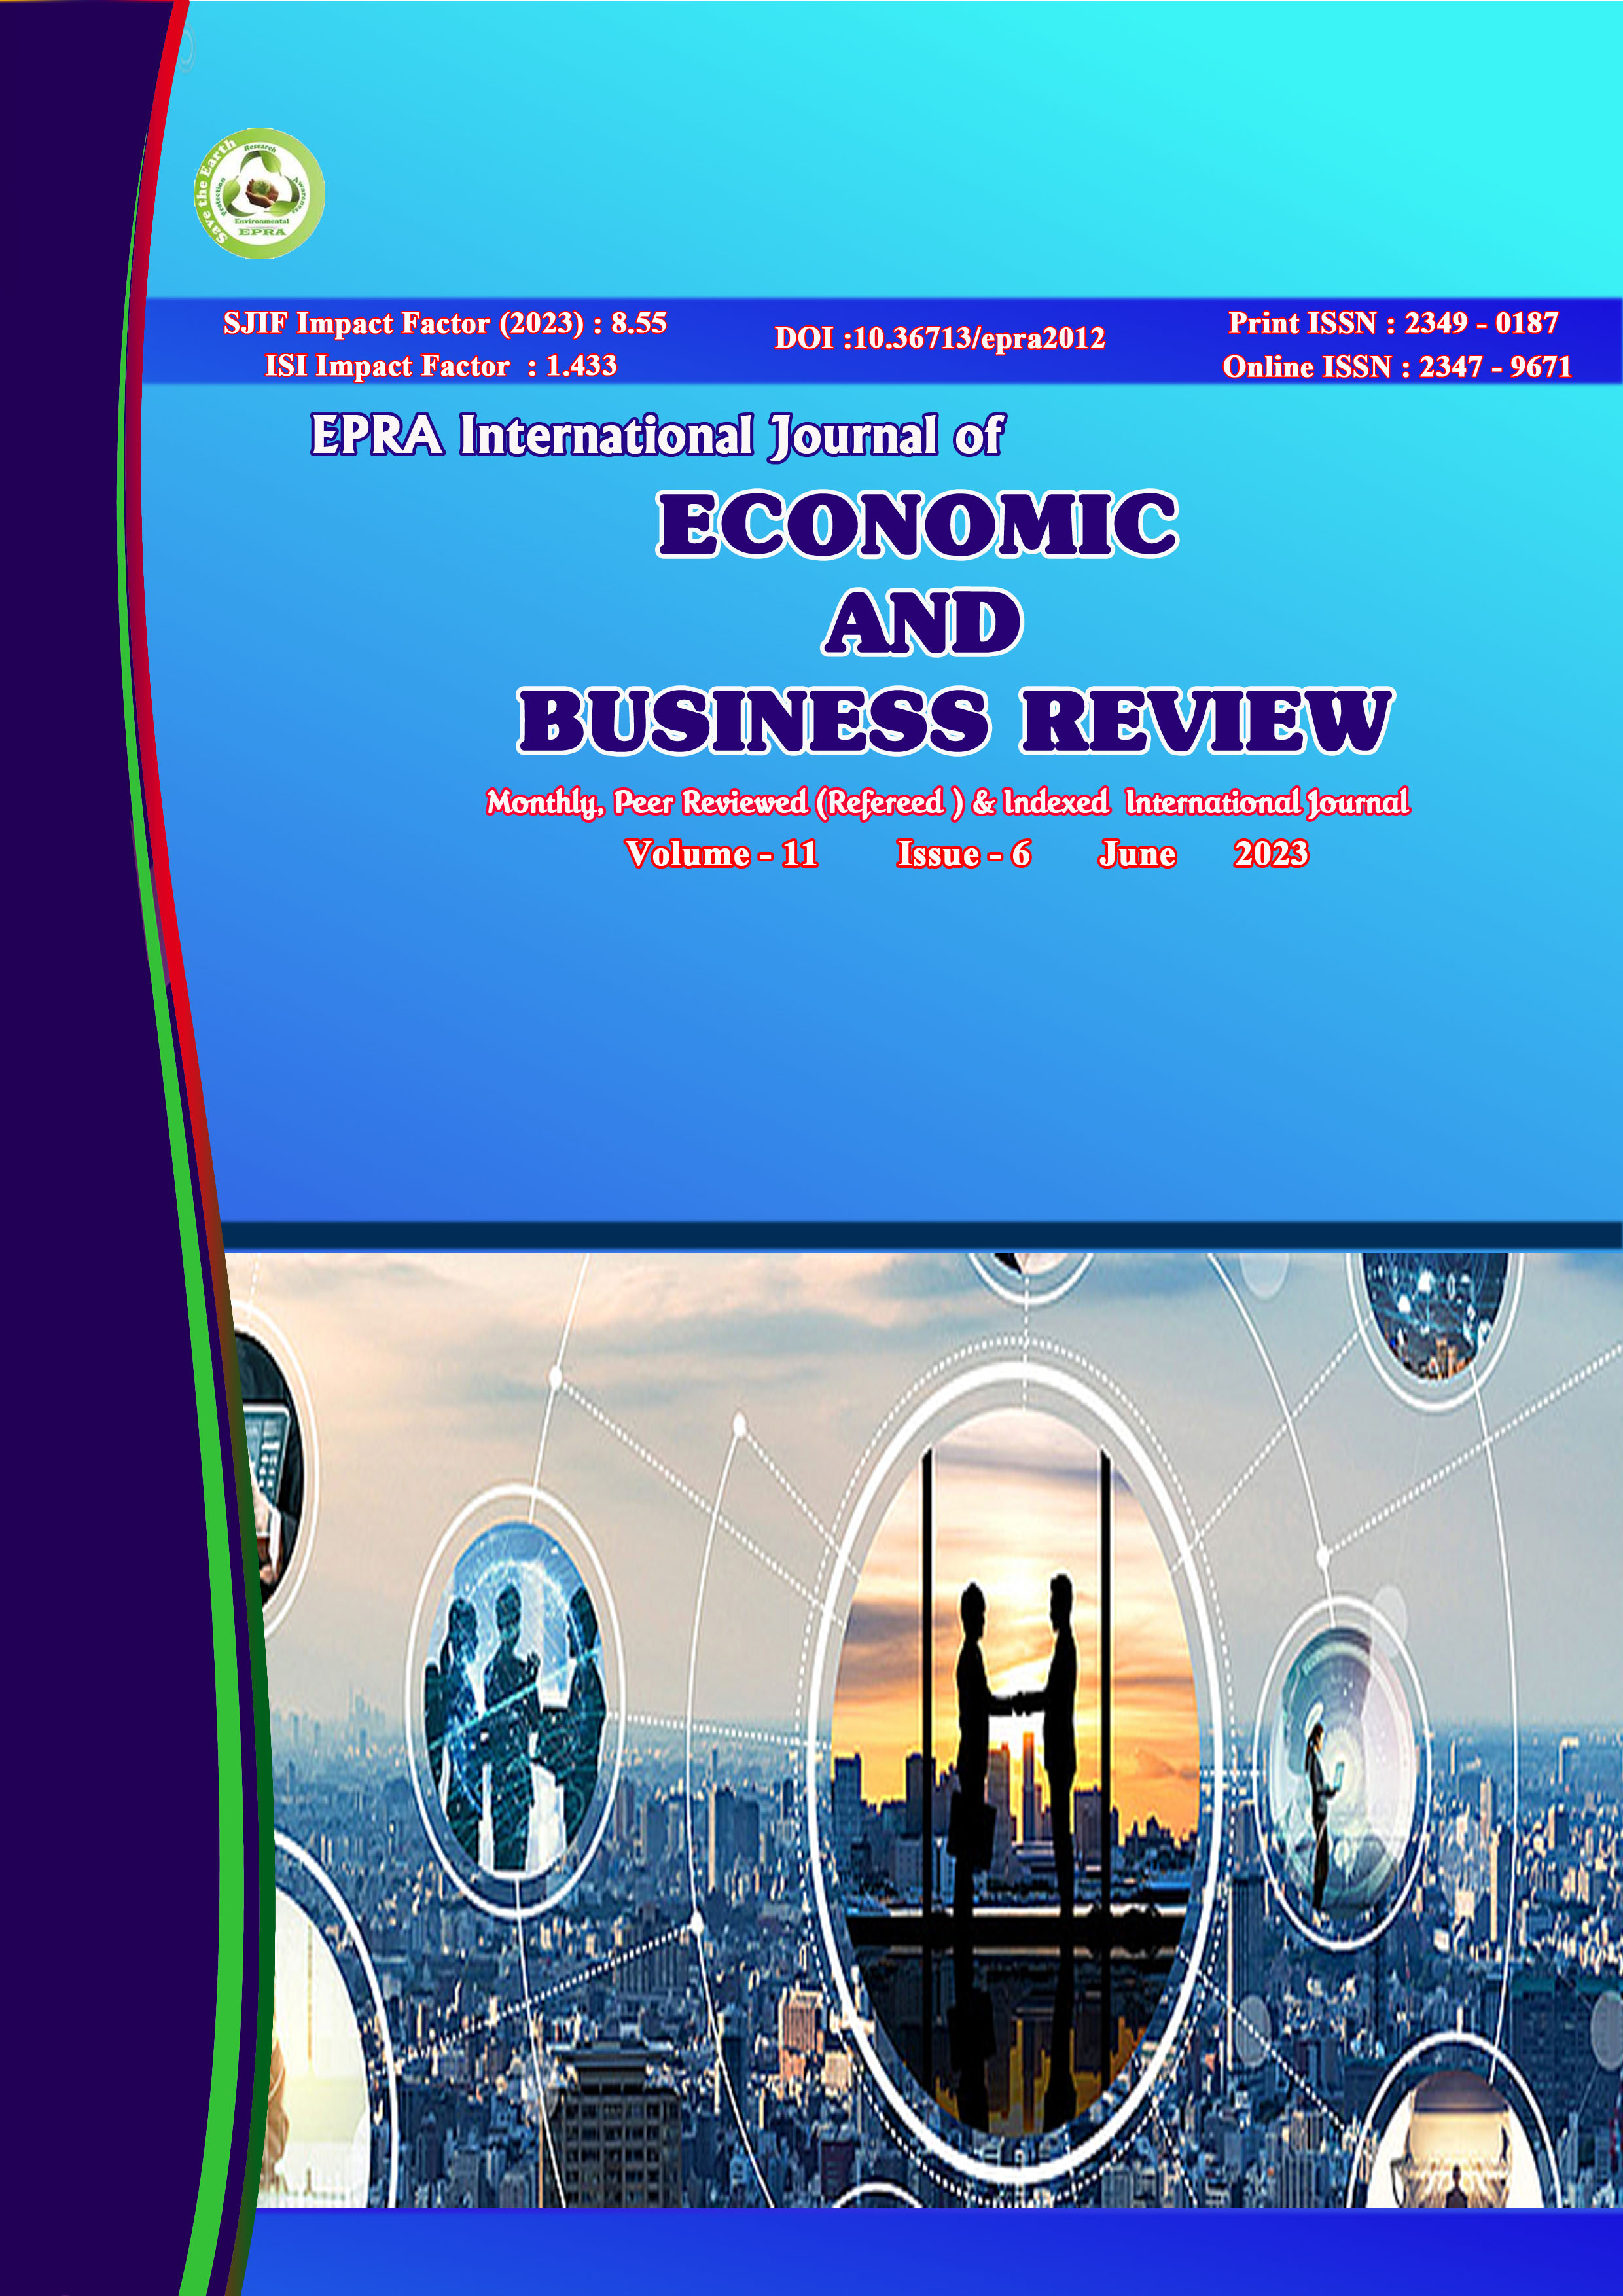 					View Vol. 11 No. 6 (2023): EPRA International Journal of Economic and Business Review(JEBR)
				